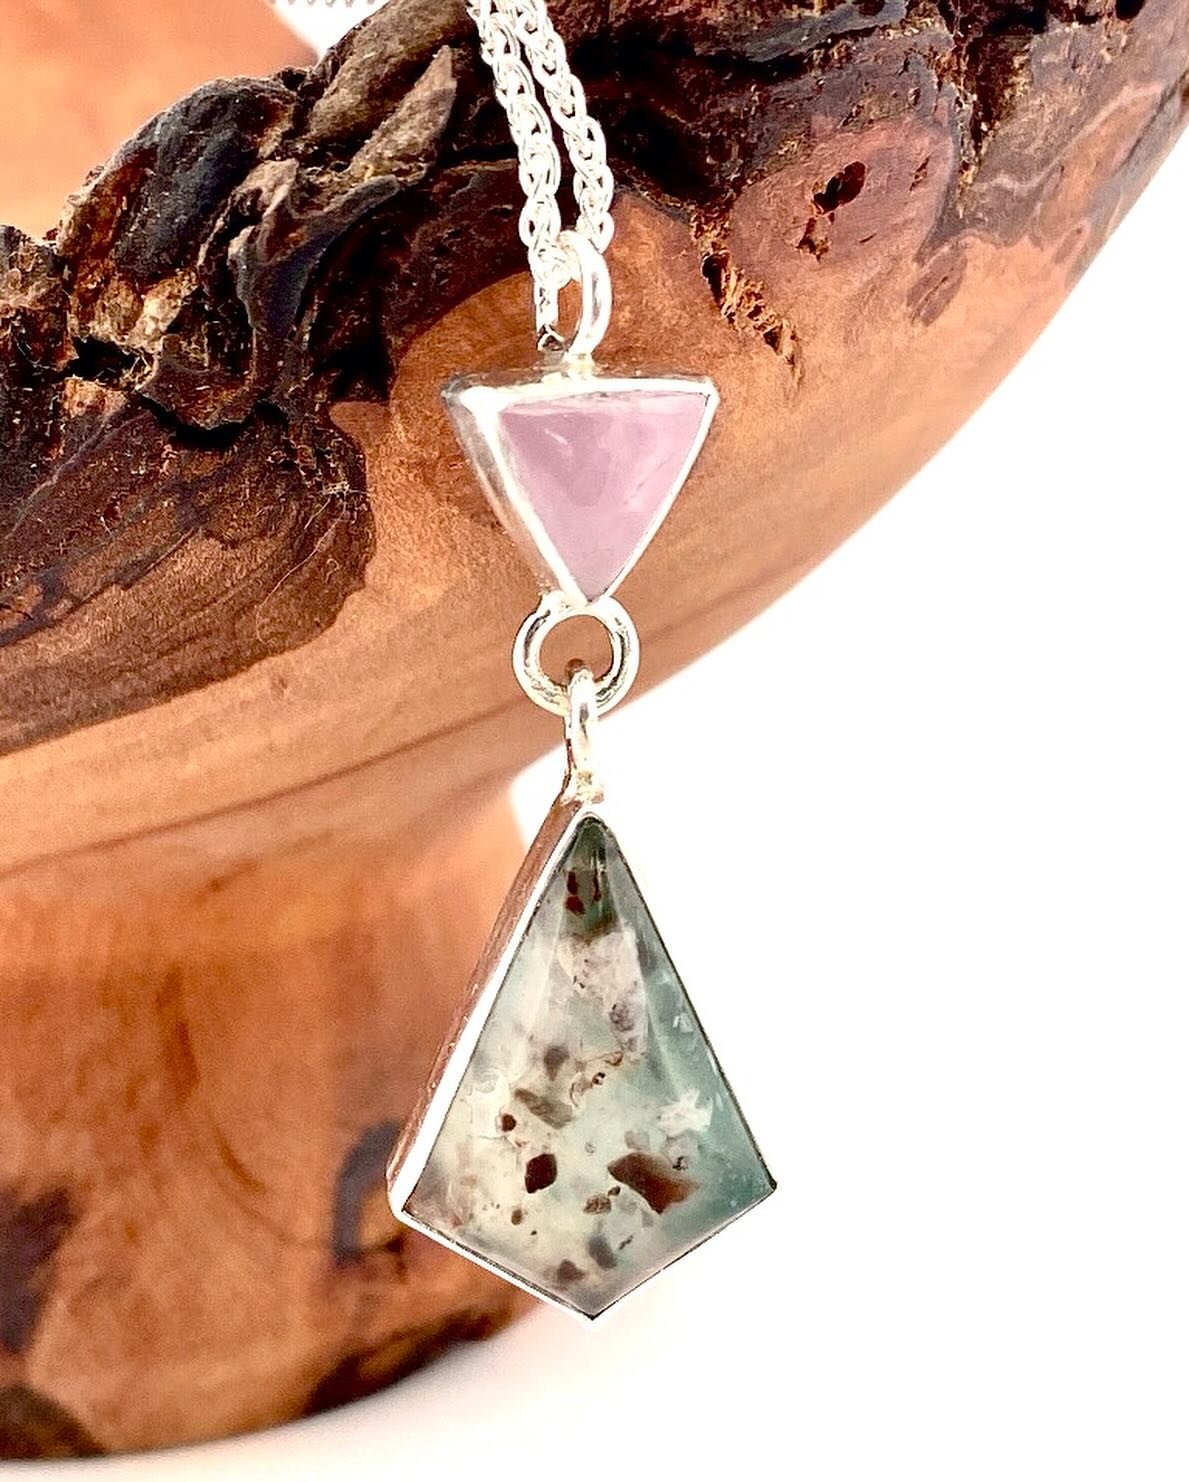 Made this #aquaprase and #kunzite #sterlingsilver pendant and I admit I&rsquo;m rather taken with it. Aquaprase isn&rsquo;t a stone I&rsquo;ve used before and this little beauty wasn&rsquo;t cheap but the transparency is lovely which I&rsquo;ve hopef